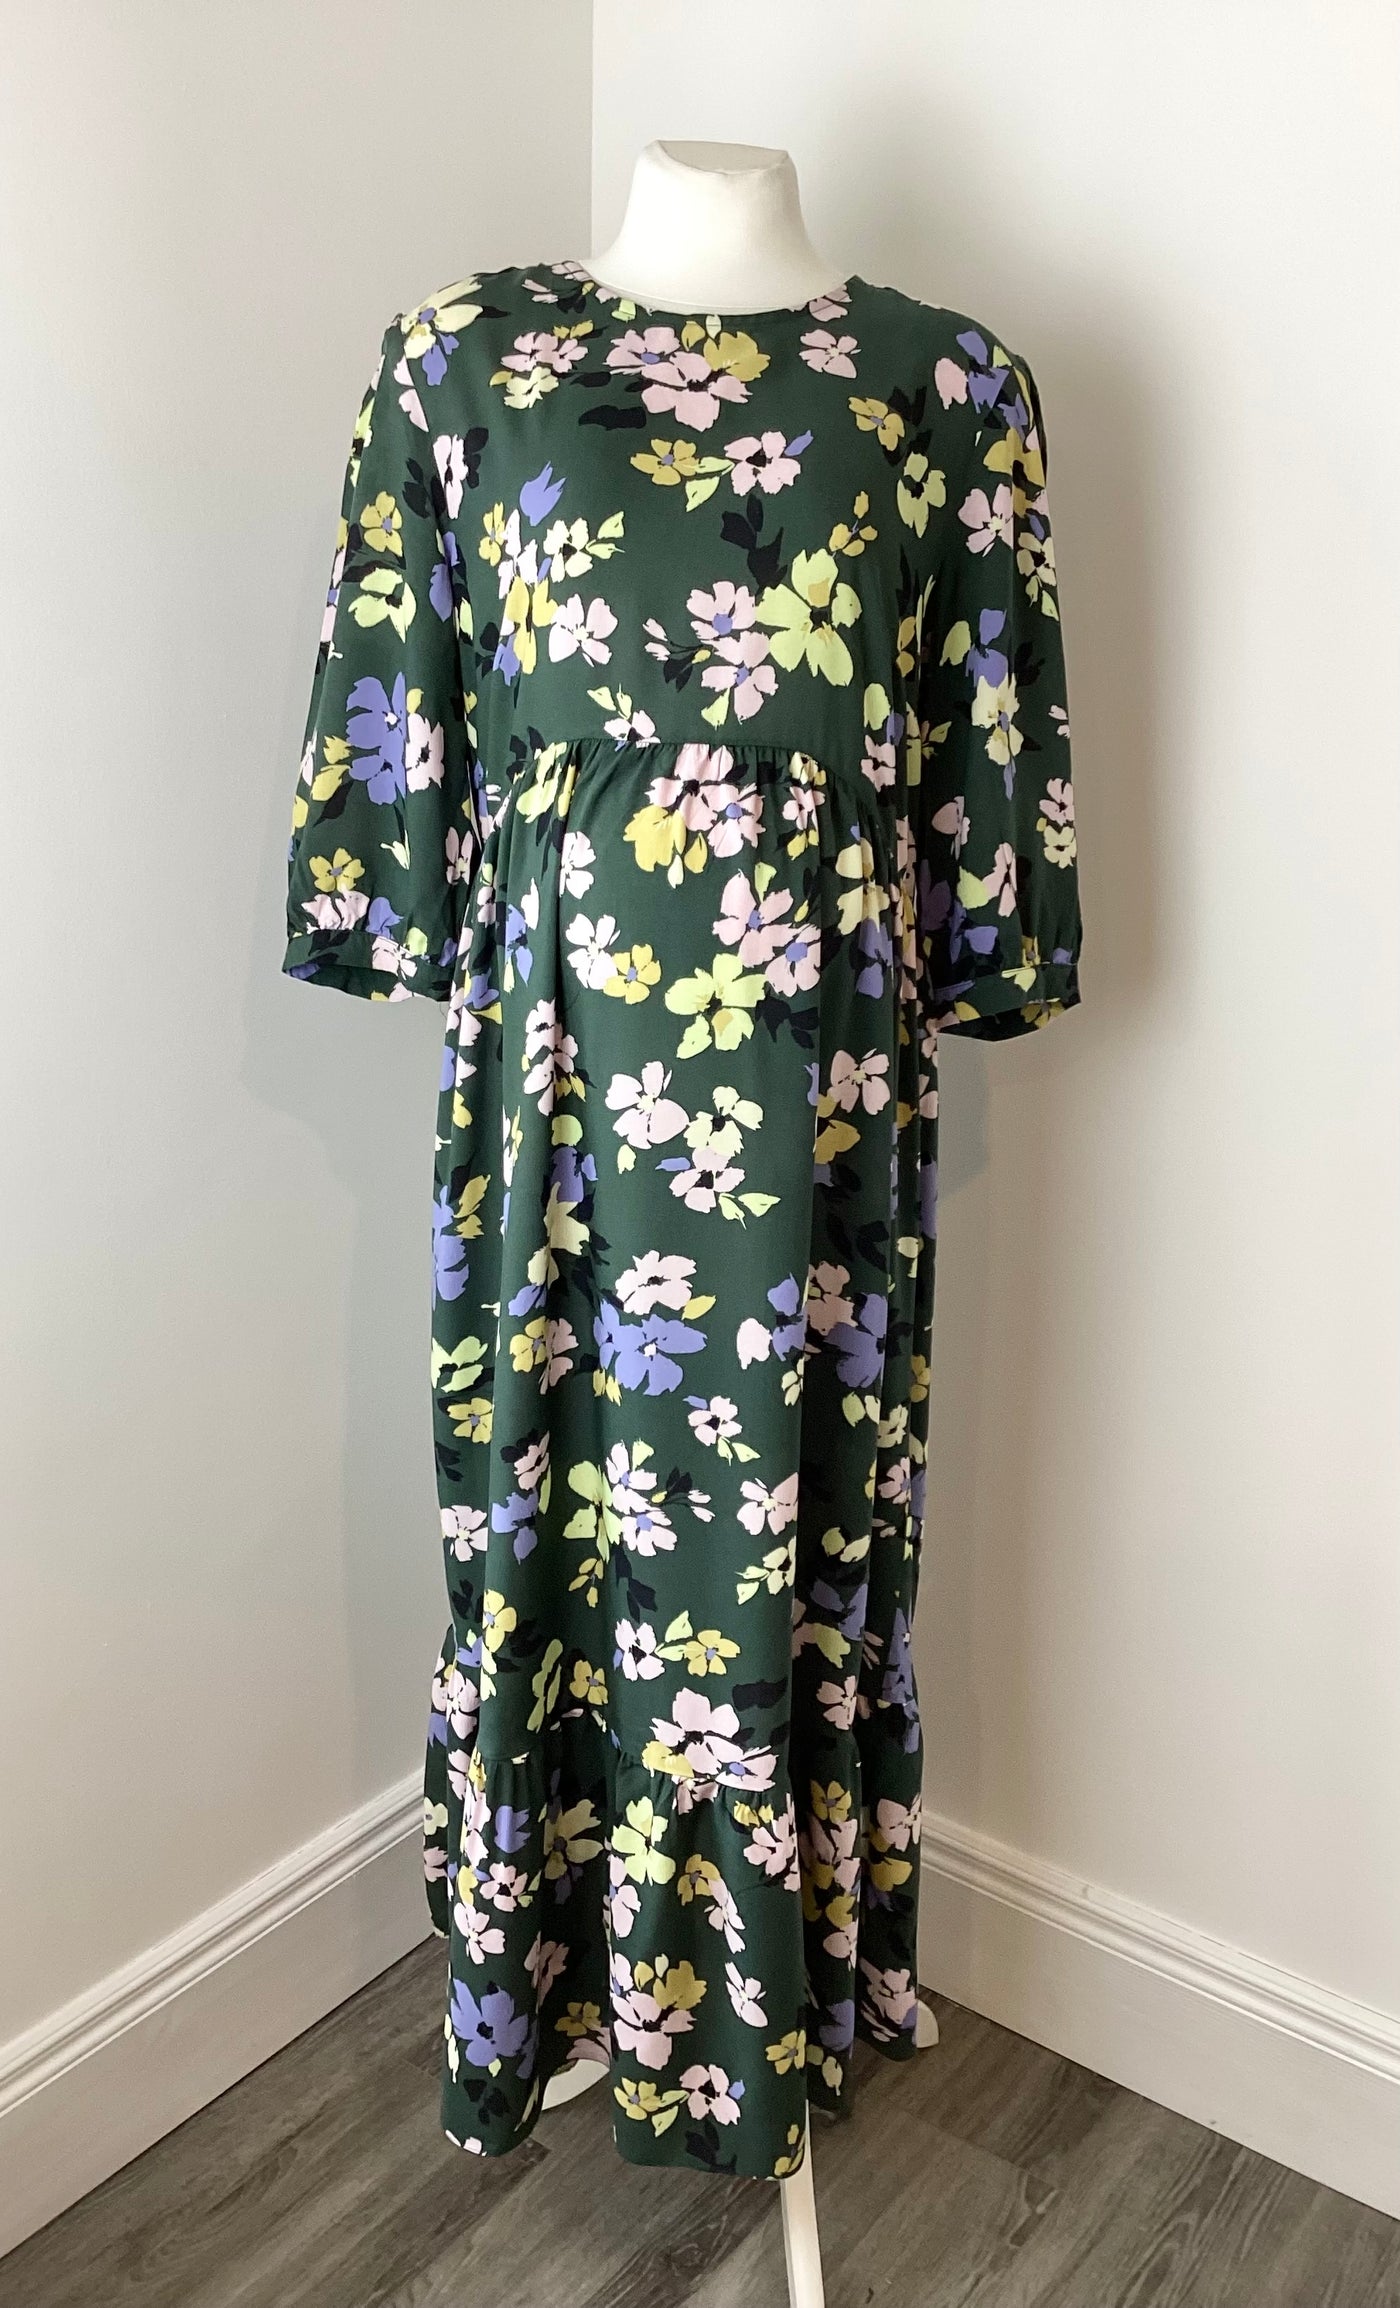 Nobody's Child Maternity forest green, yellow & pink floral dress with 3/4 sleeves - Size 14